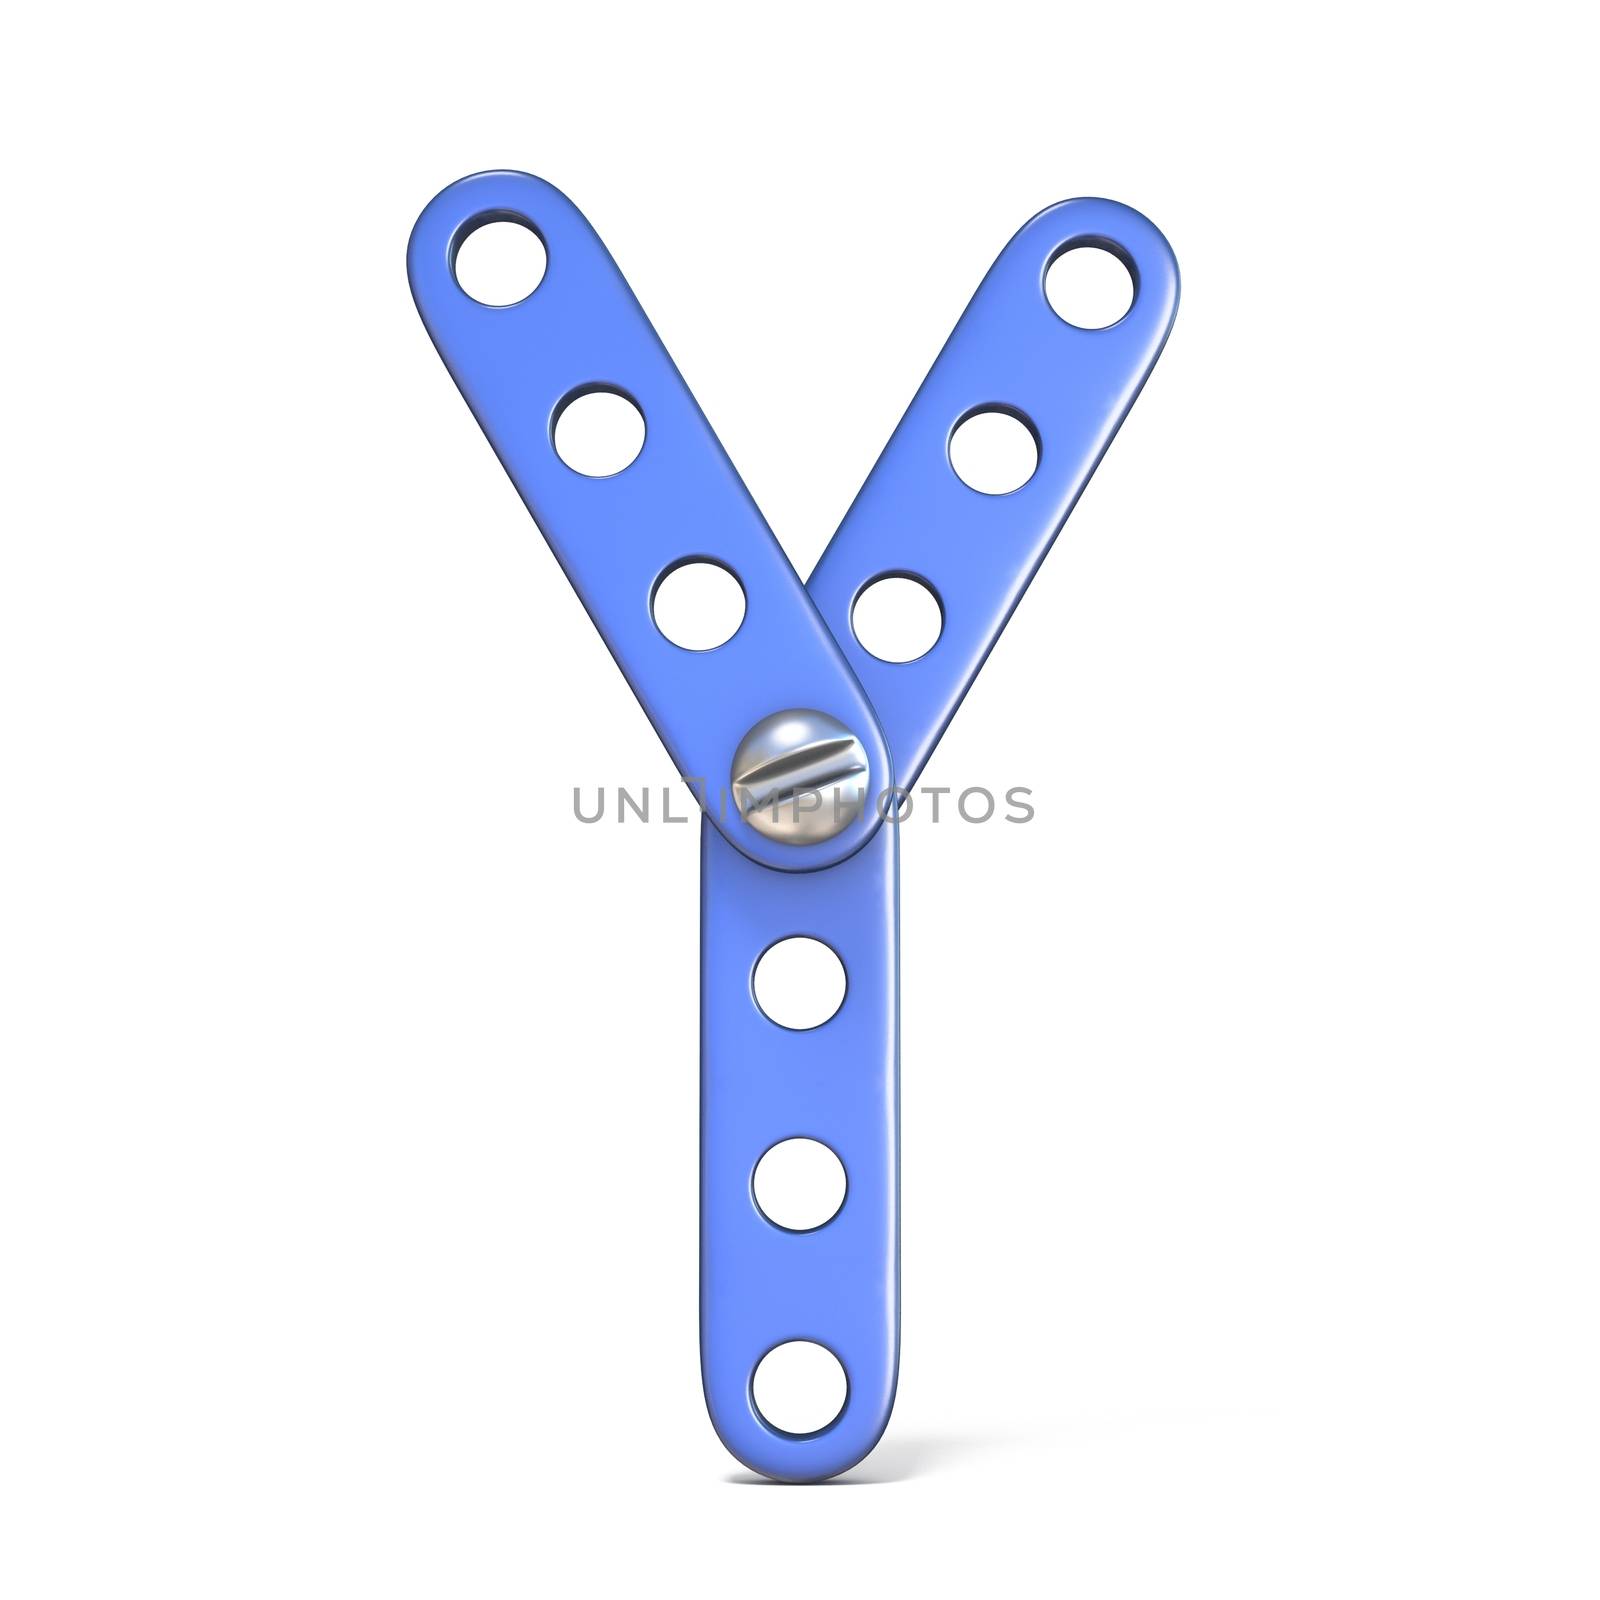 Alphabet made of blue metal constructor toy Letter Y 3D render illustration isolated on white background